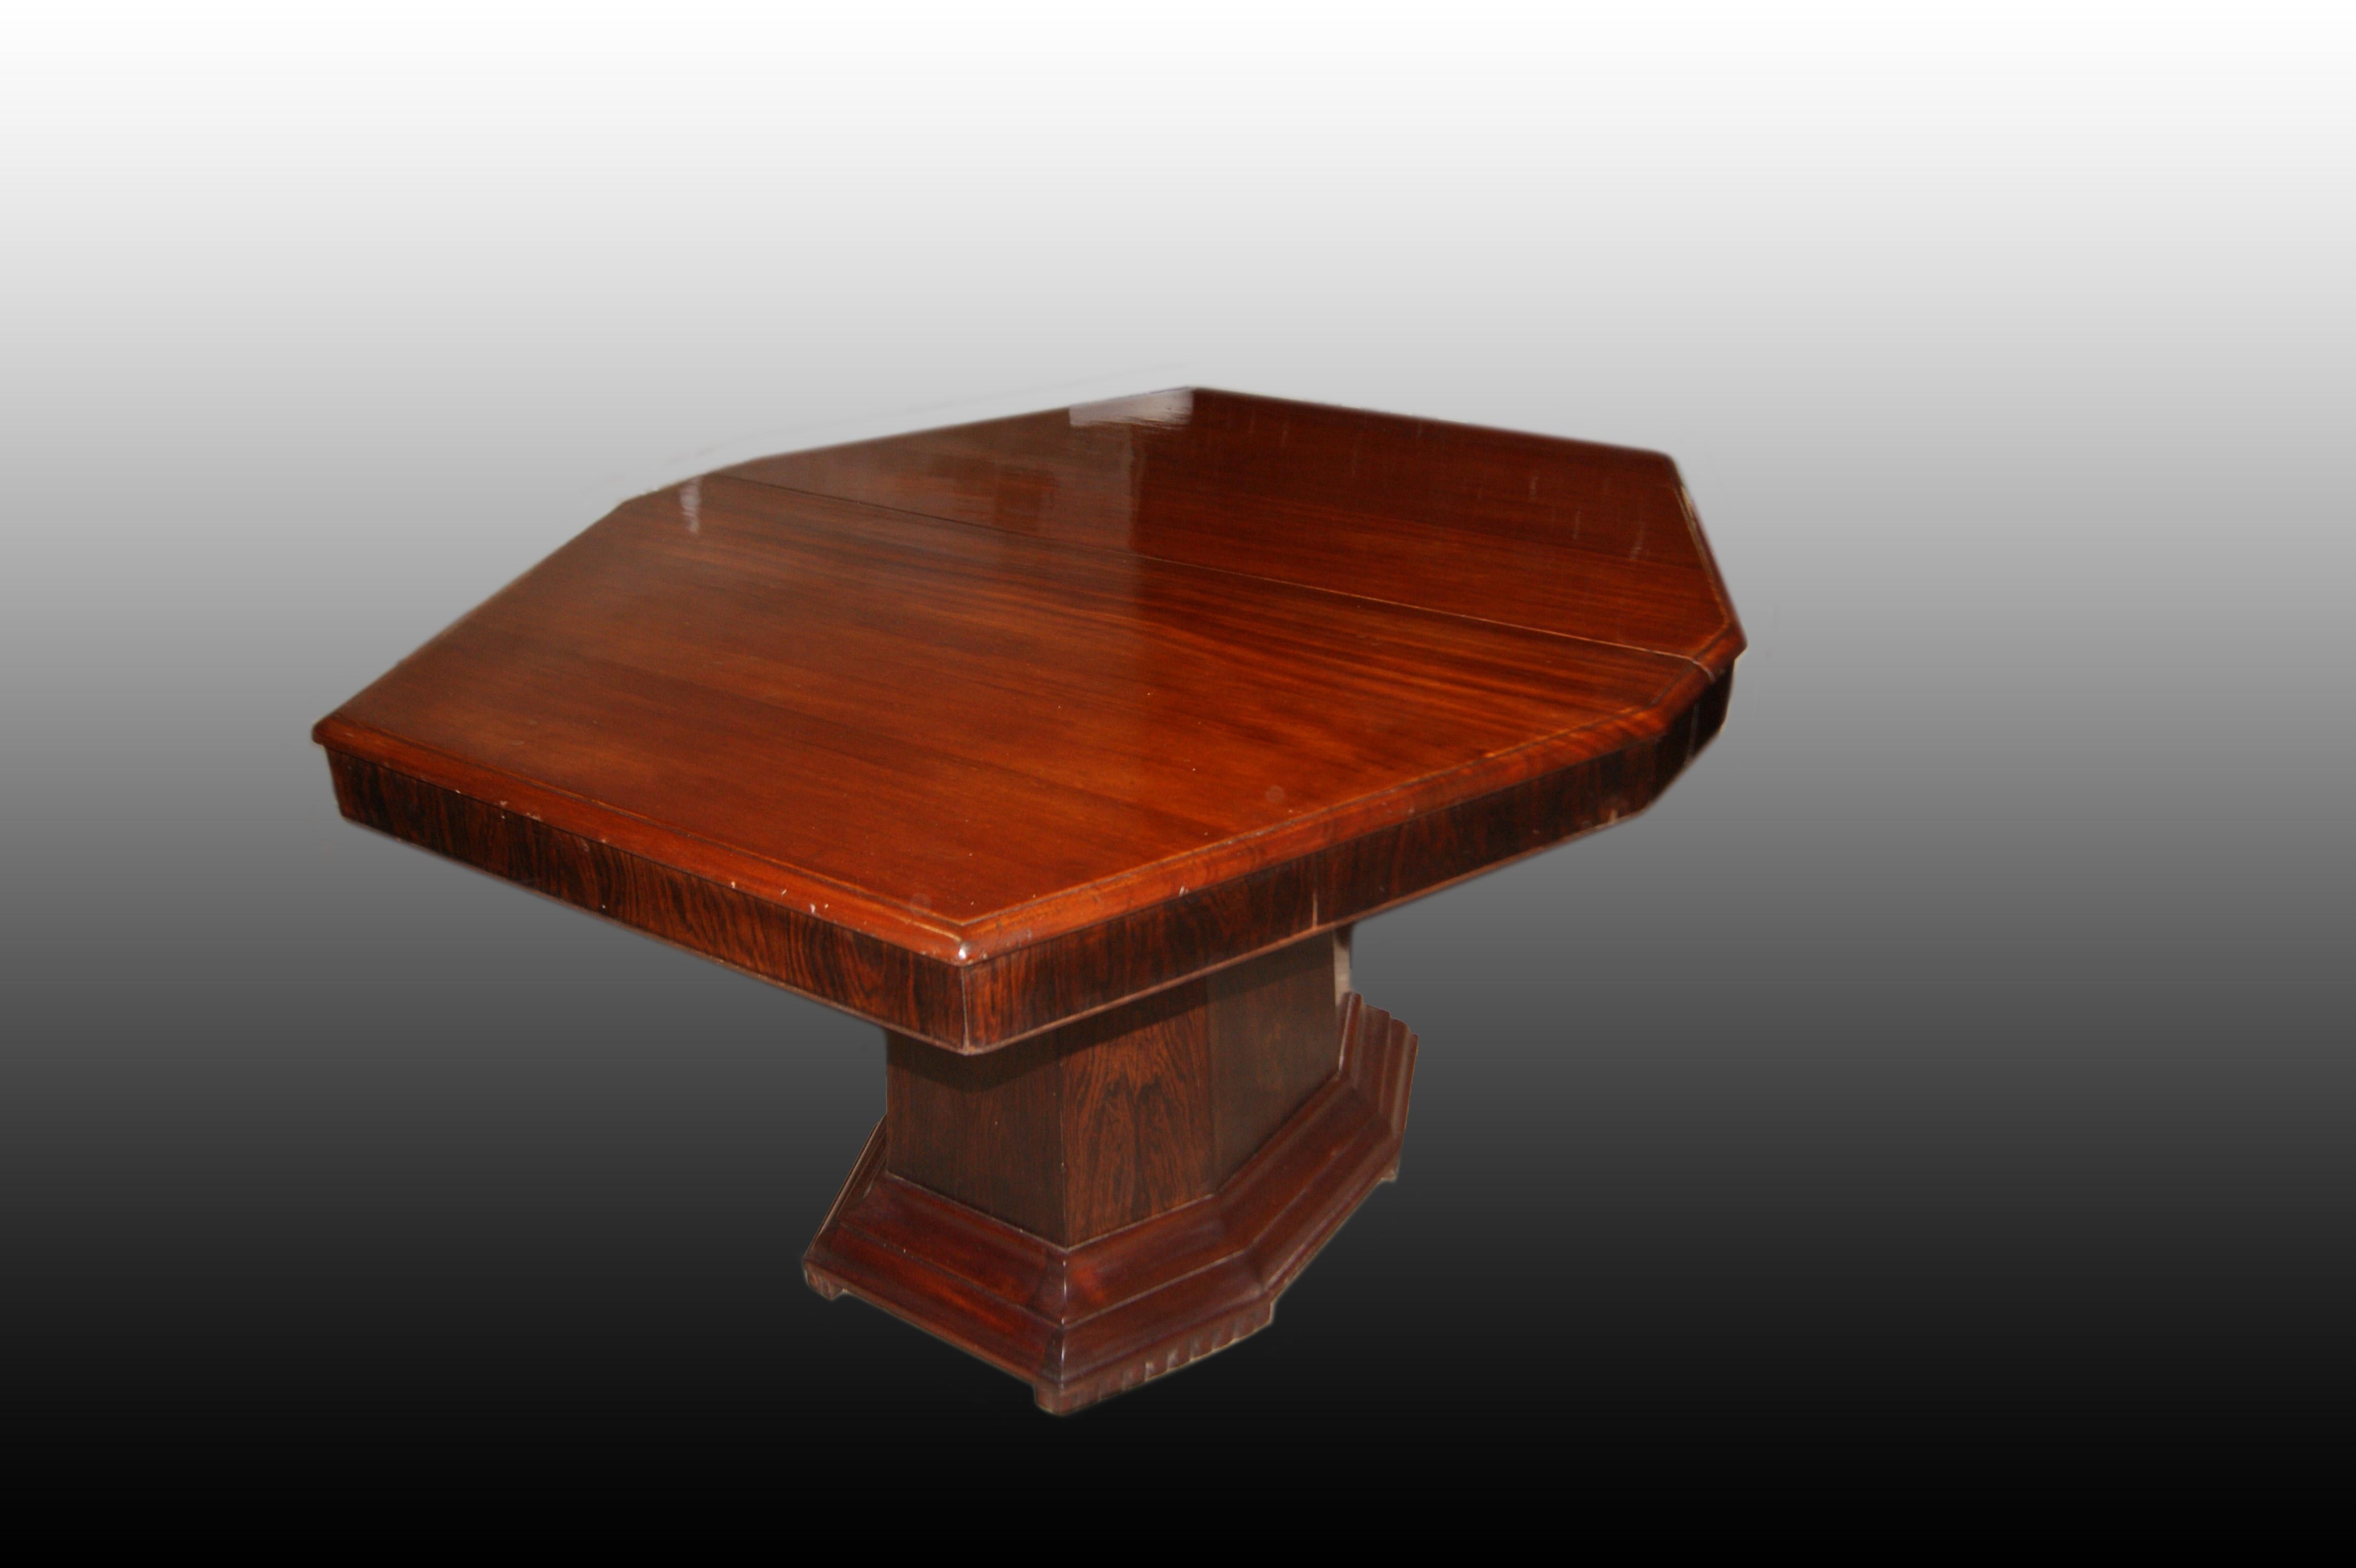 20th Century French Art Deco Table from the Early 1900s, Made of Mahogany and Ebony Wood For Sale